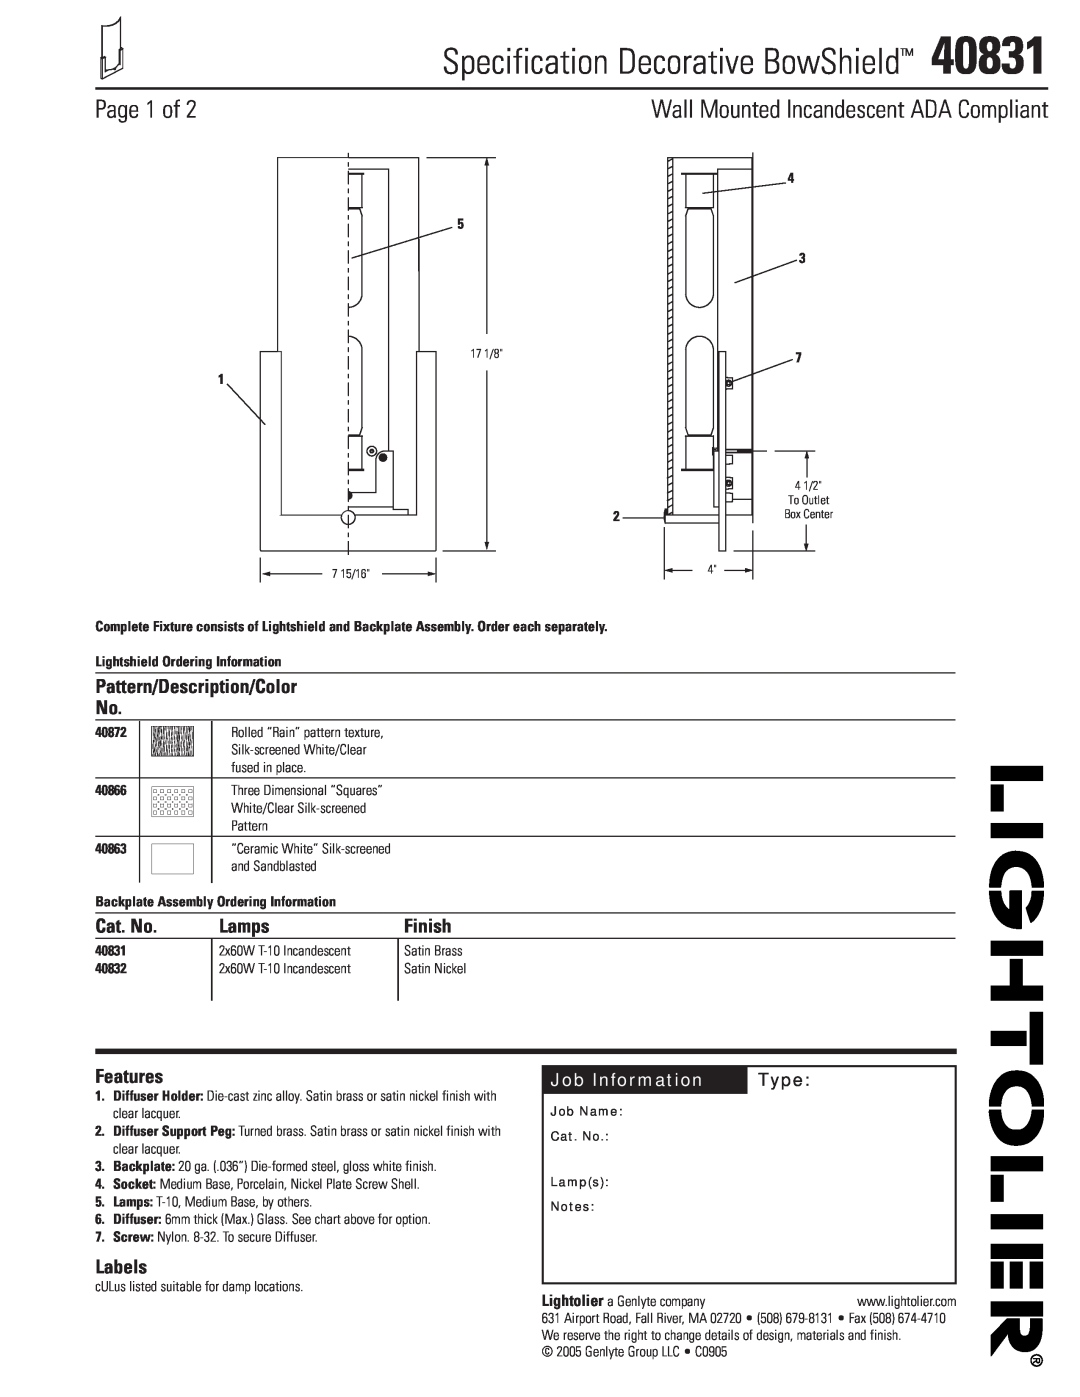 Lightolier 40831 manual Specification Decorative BowShield, Page 1 of, Pattern/Description/Color No, Cat. No, Lamps, Type 